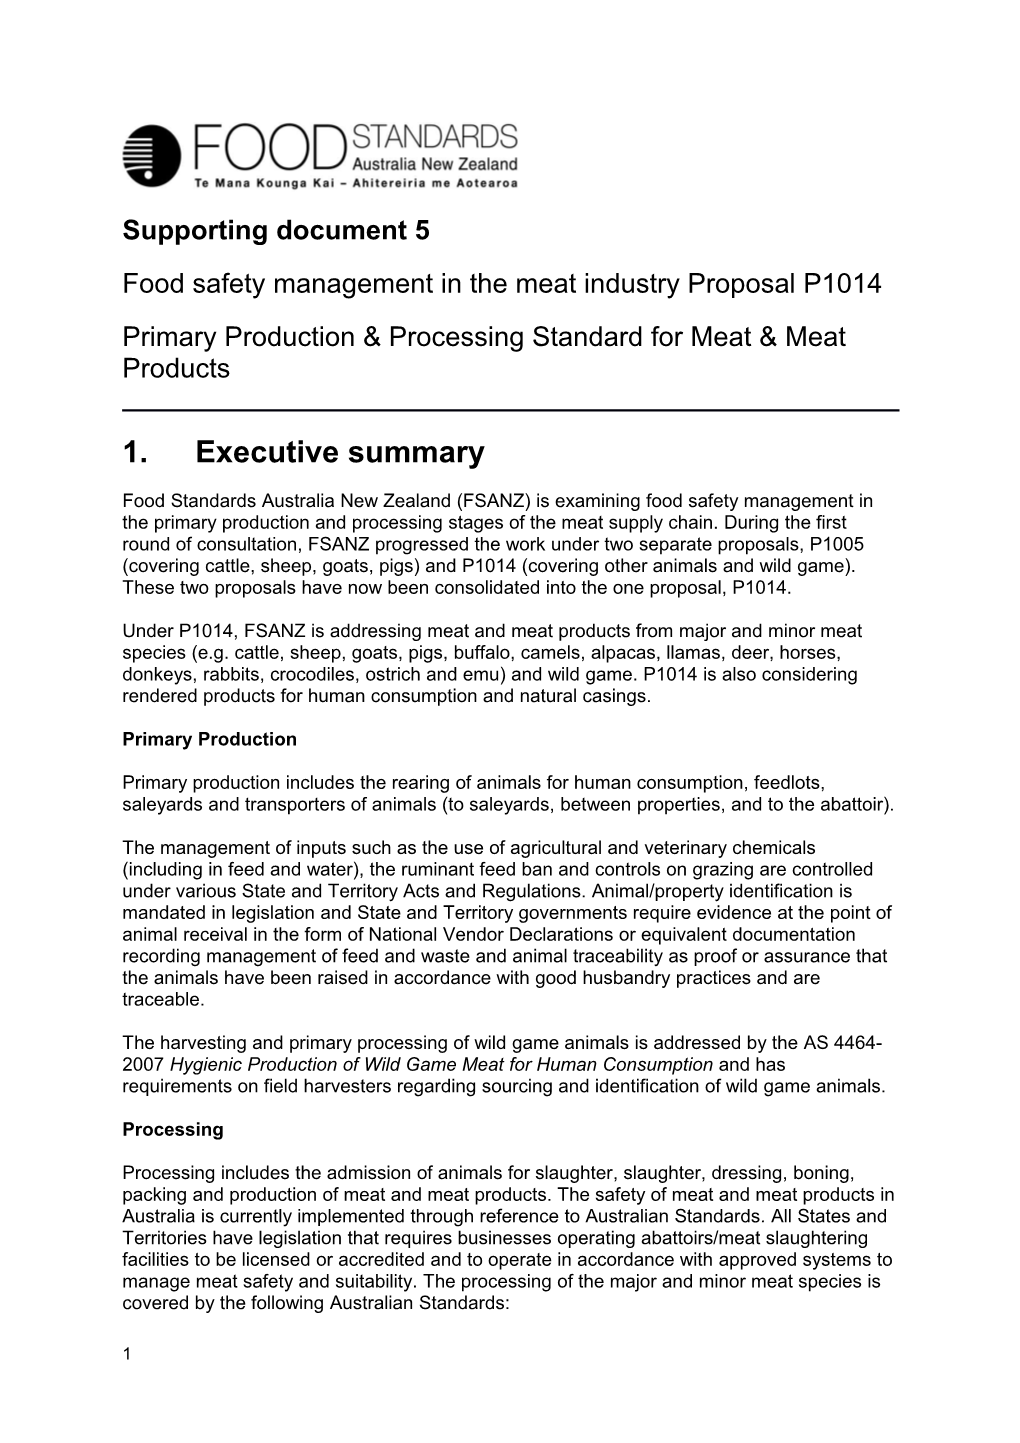 Food Safety Management in the Meat Industryproposal P1014